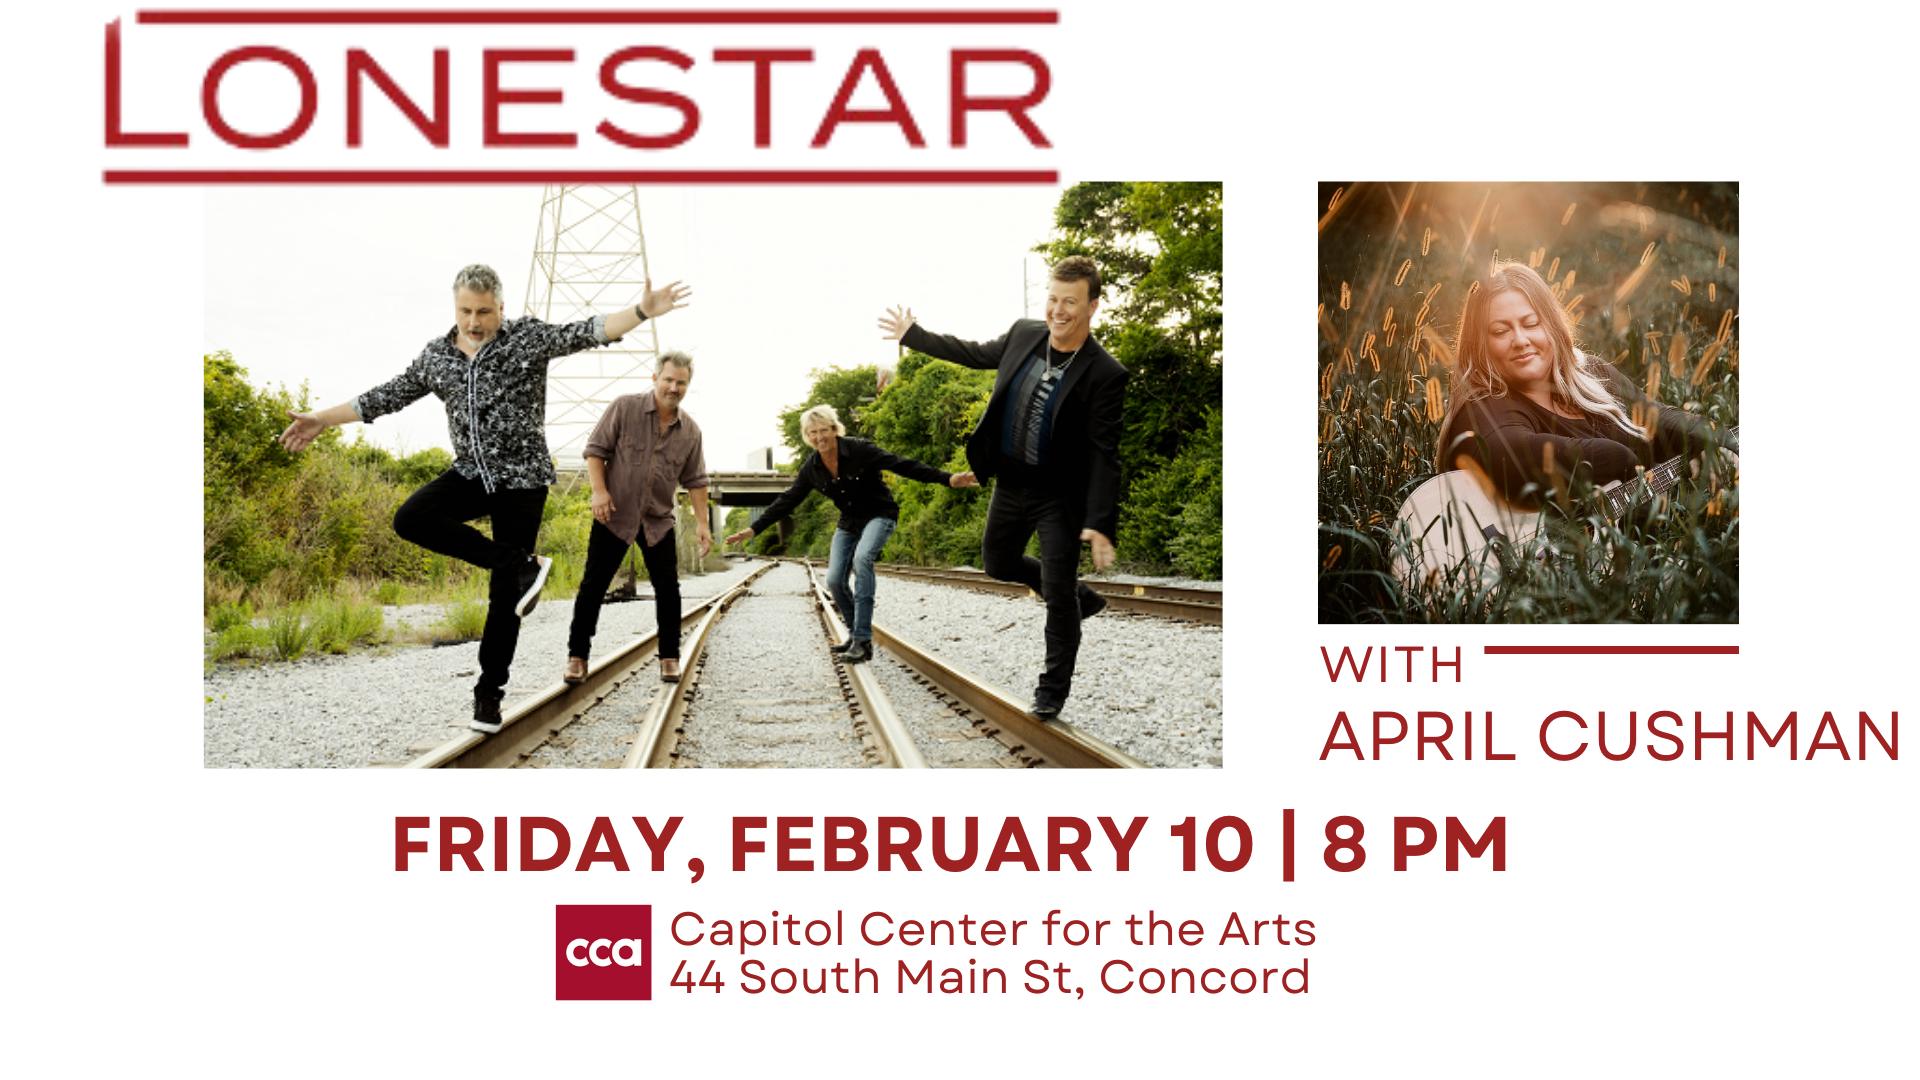 Win Tickets To See Lonestar At The Capital Center for the Arts!